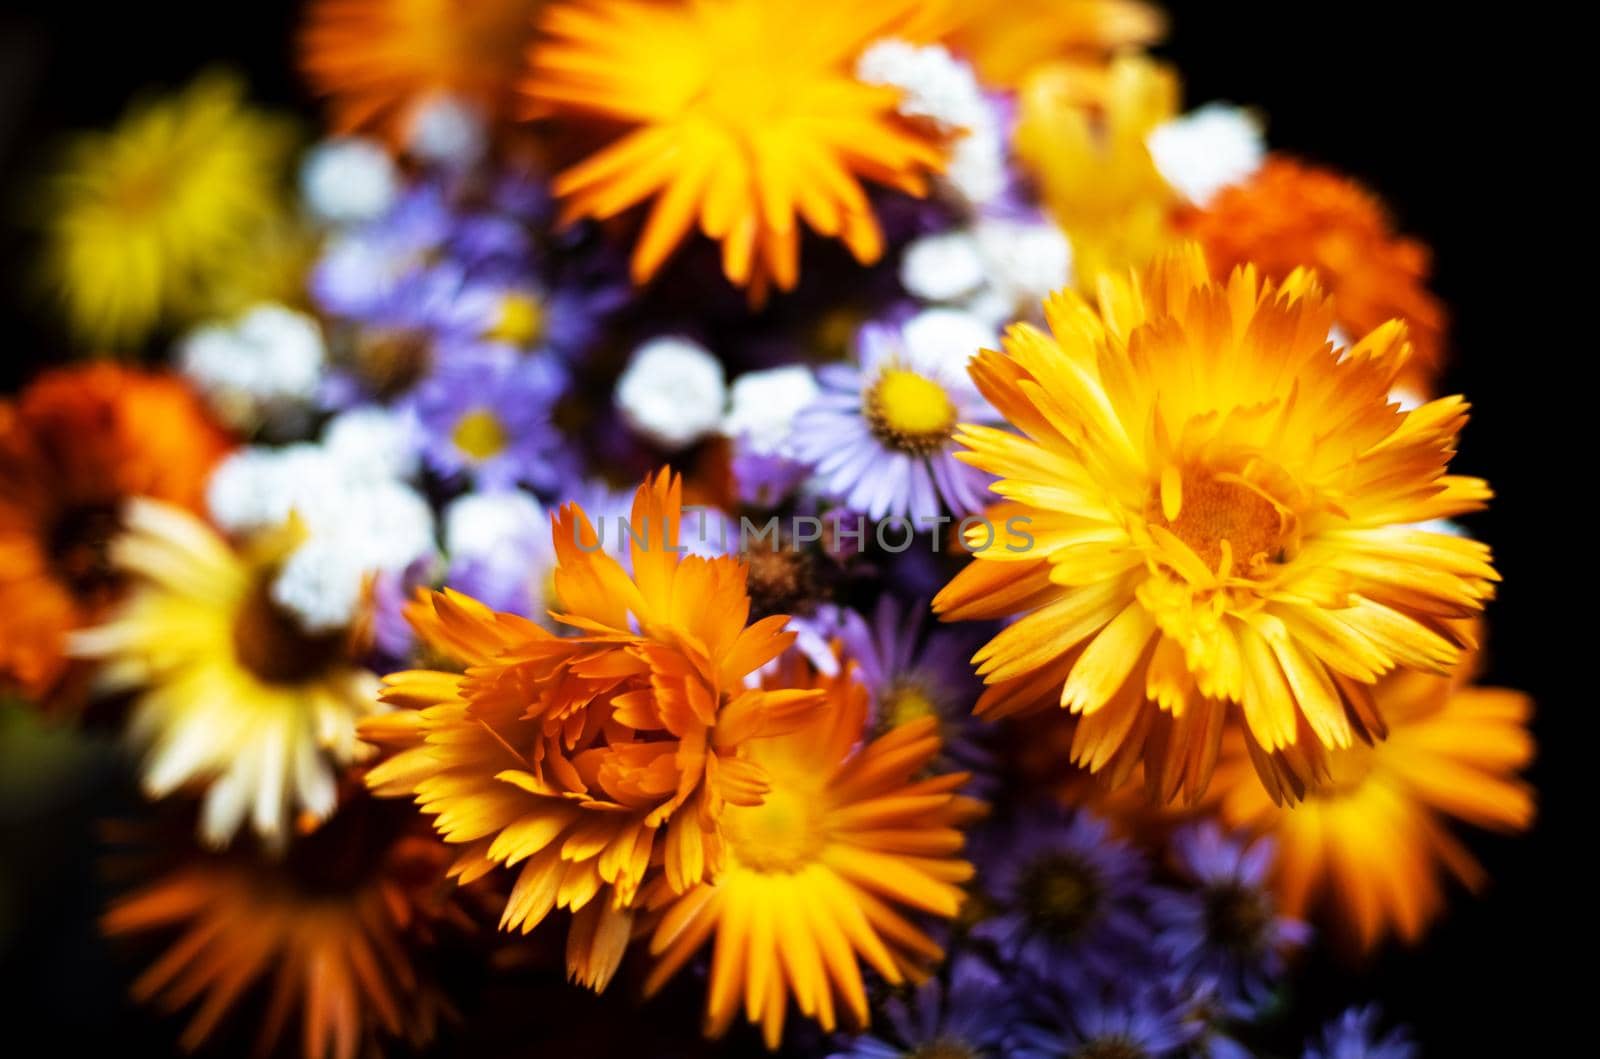 Bouquet of brightly orange and lilac colors against a dark background by Estival